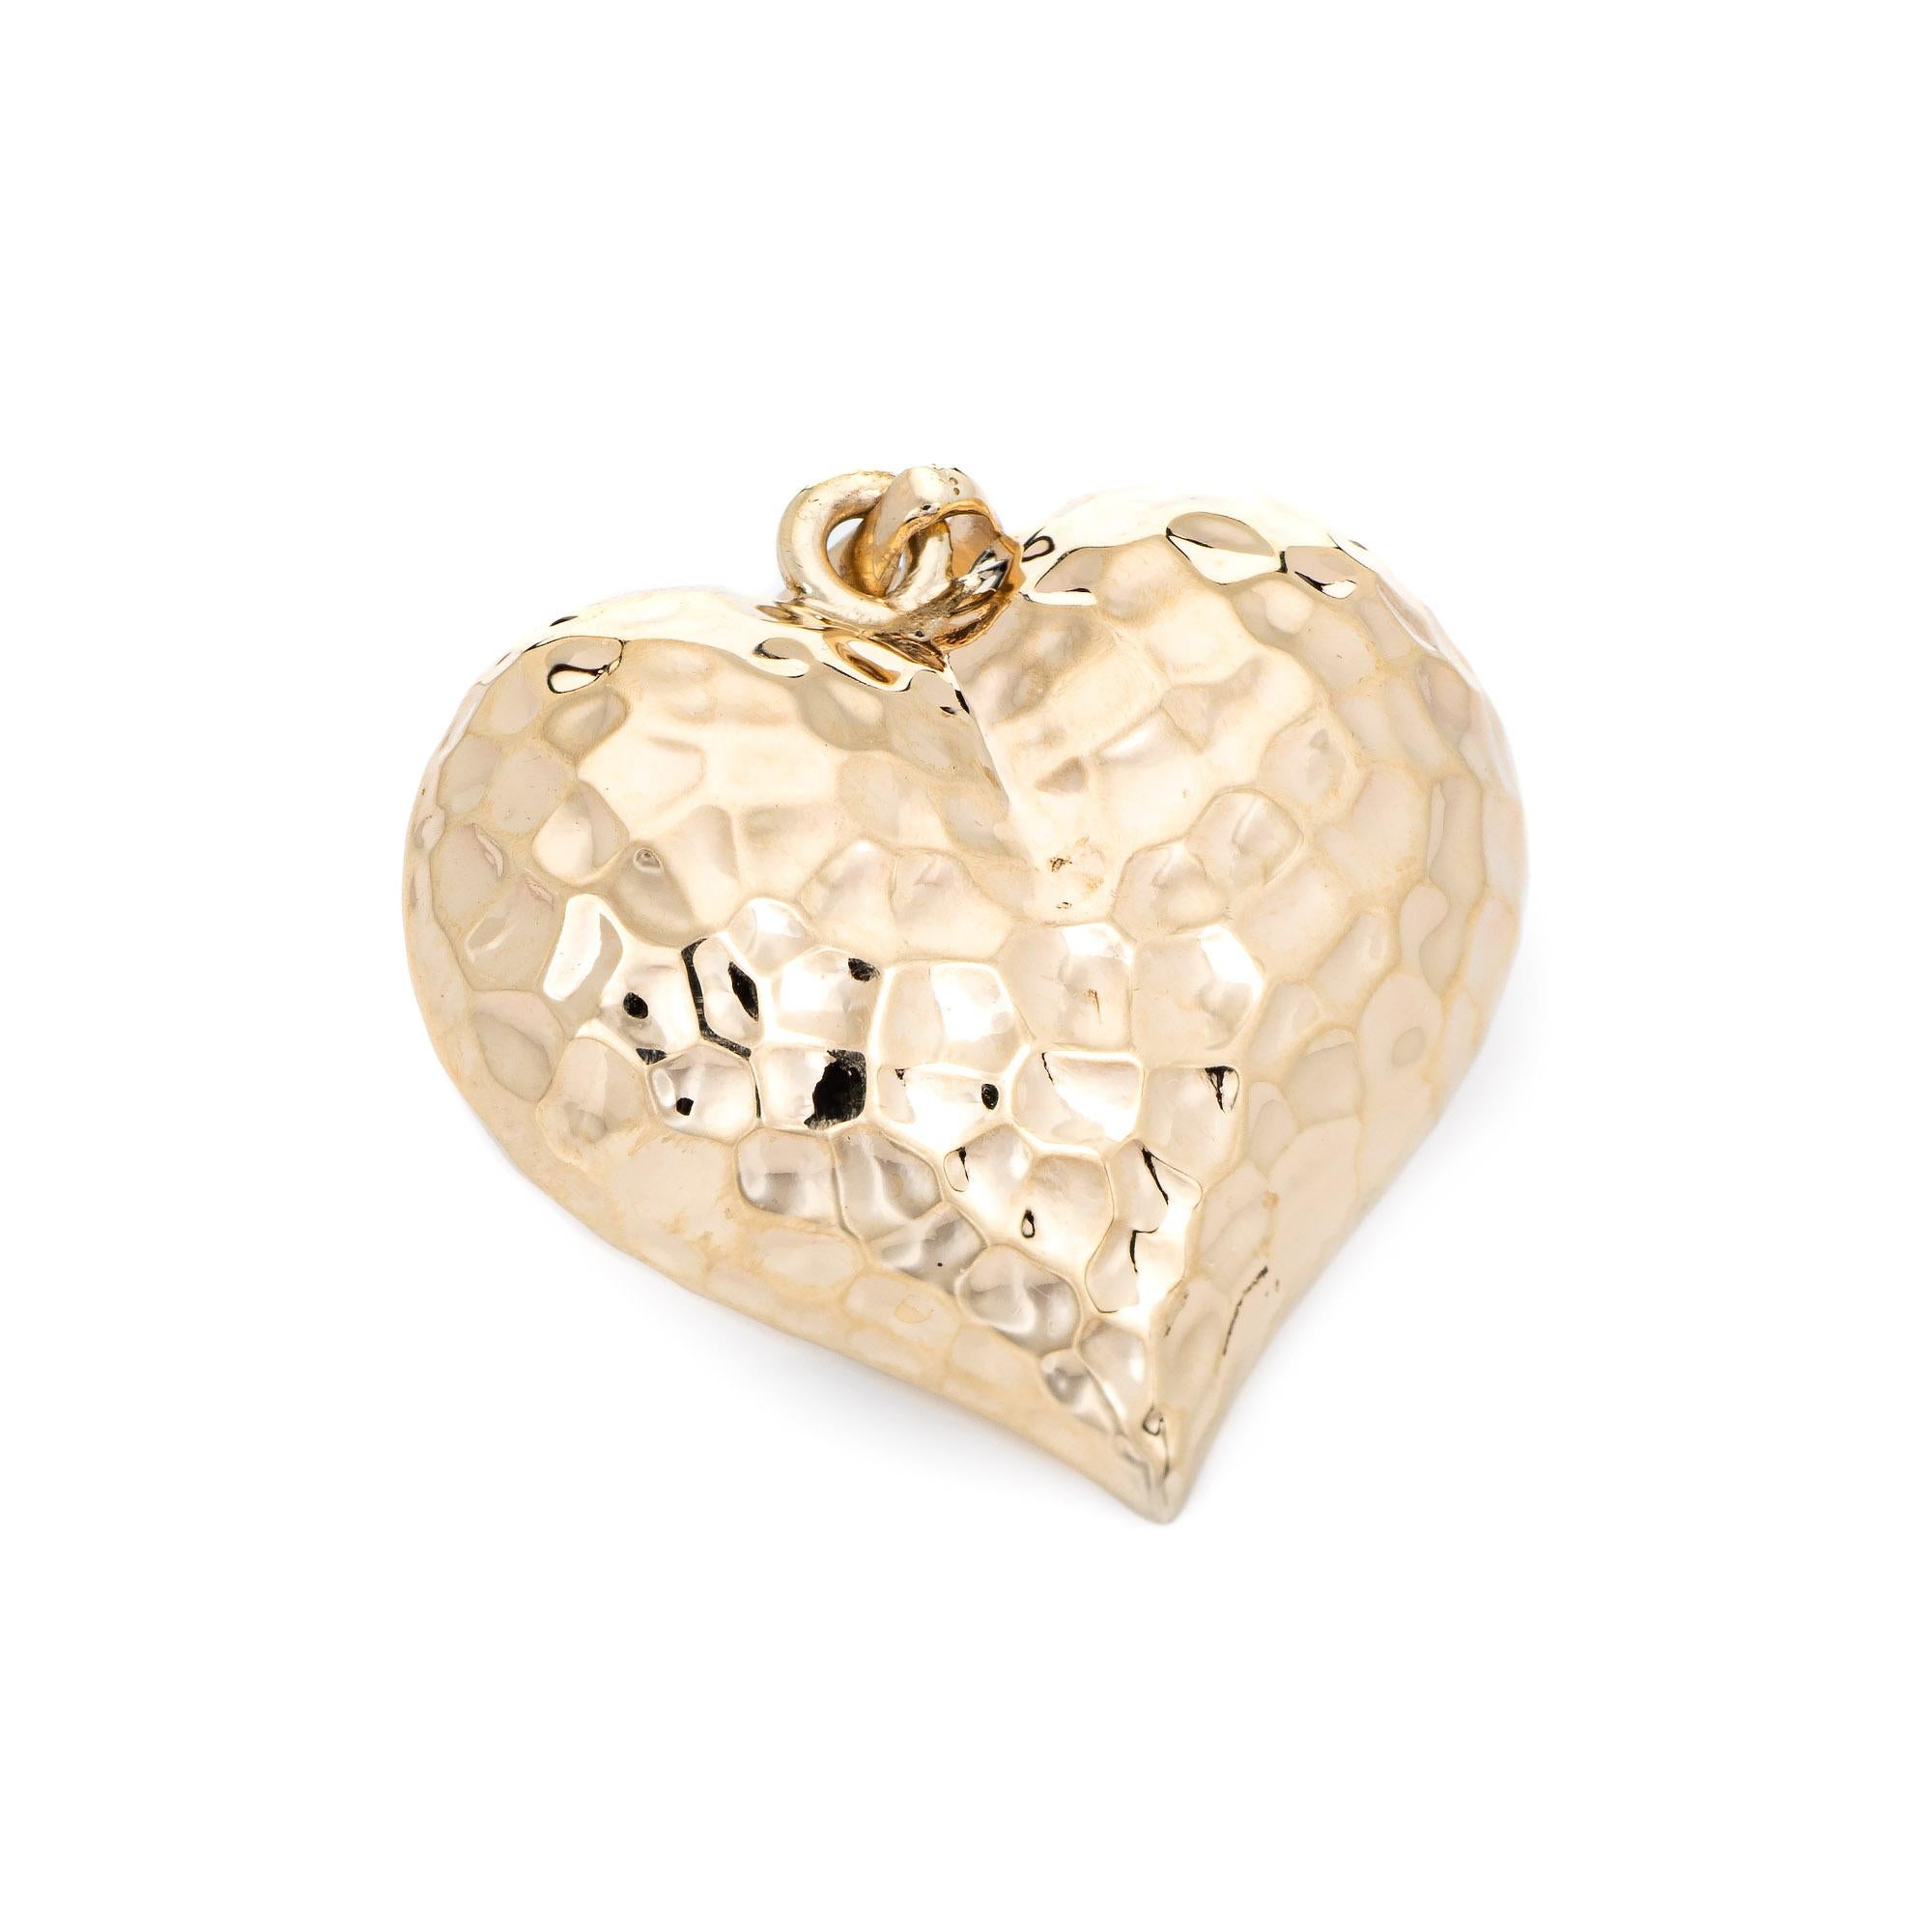 Stylish and finely detailed double sided puffed heart pendant crafted in 14k yellow gold.

The pendant is double sided with a hammered design. The pendant is hollow and has a lightweight feel. Ideal for wear as a pendant on a necklace or on a charm